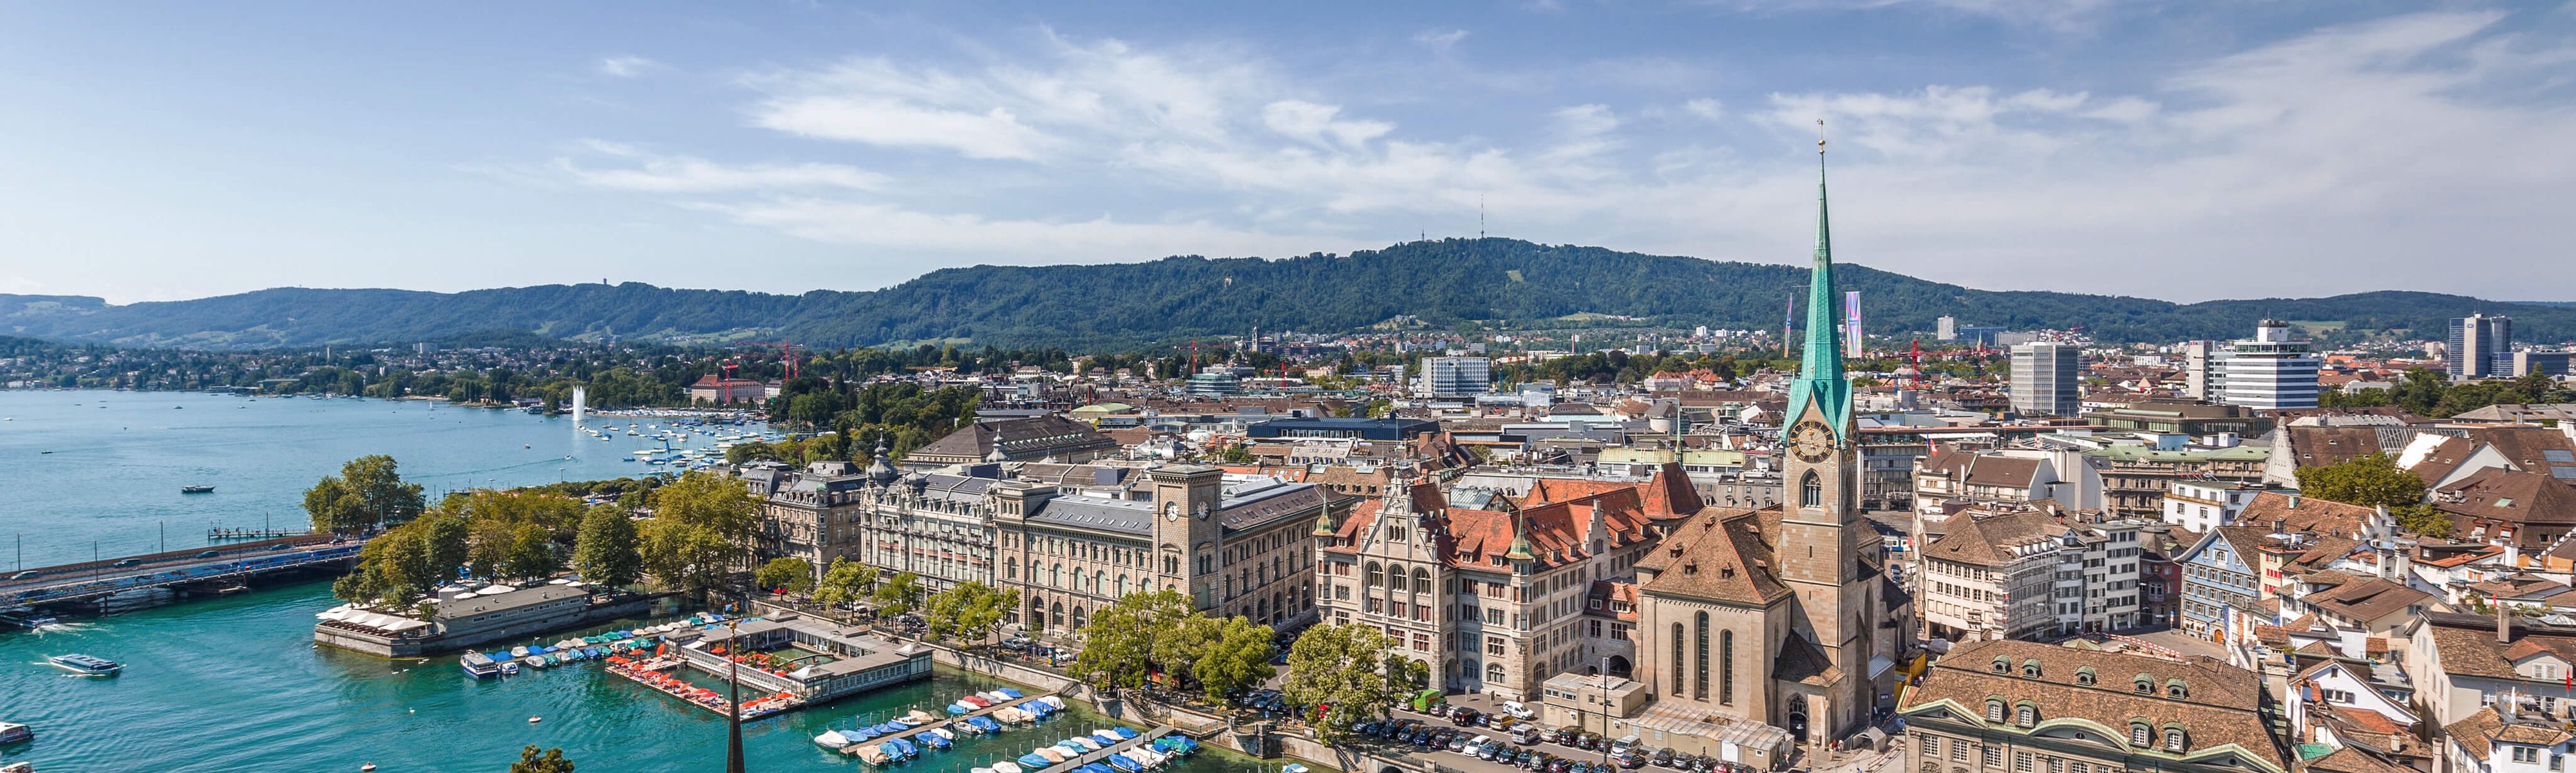 city scape of Zurich switzerland on a sunny day